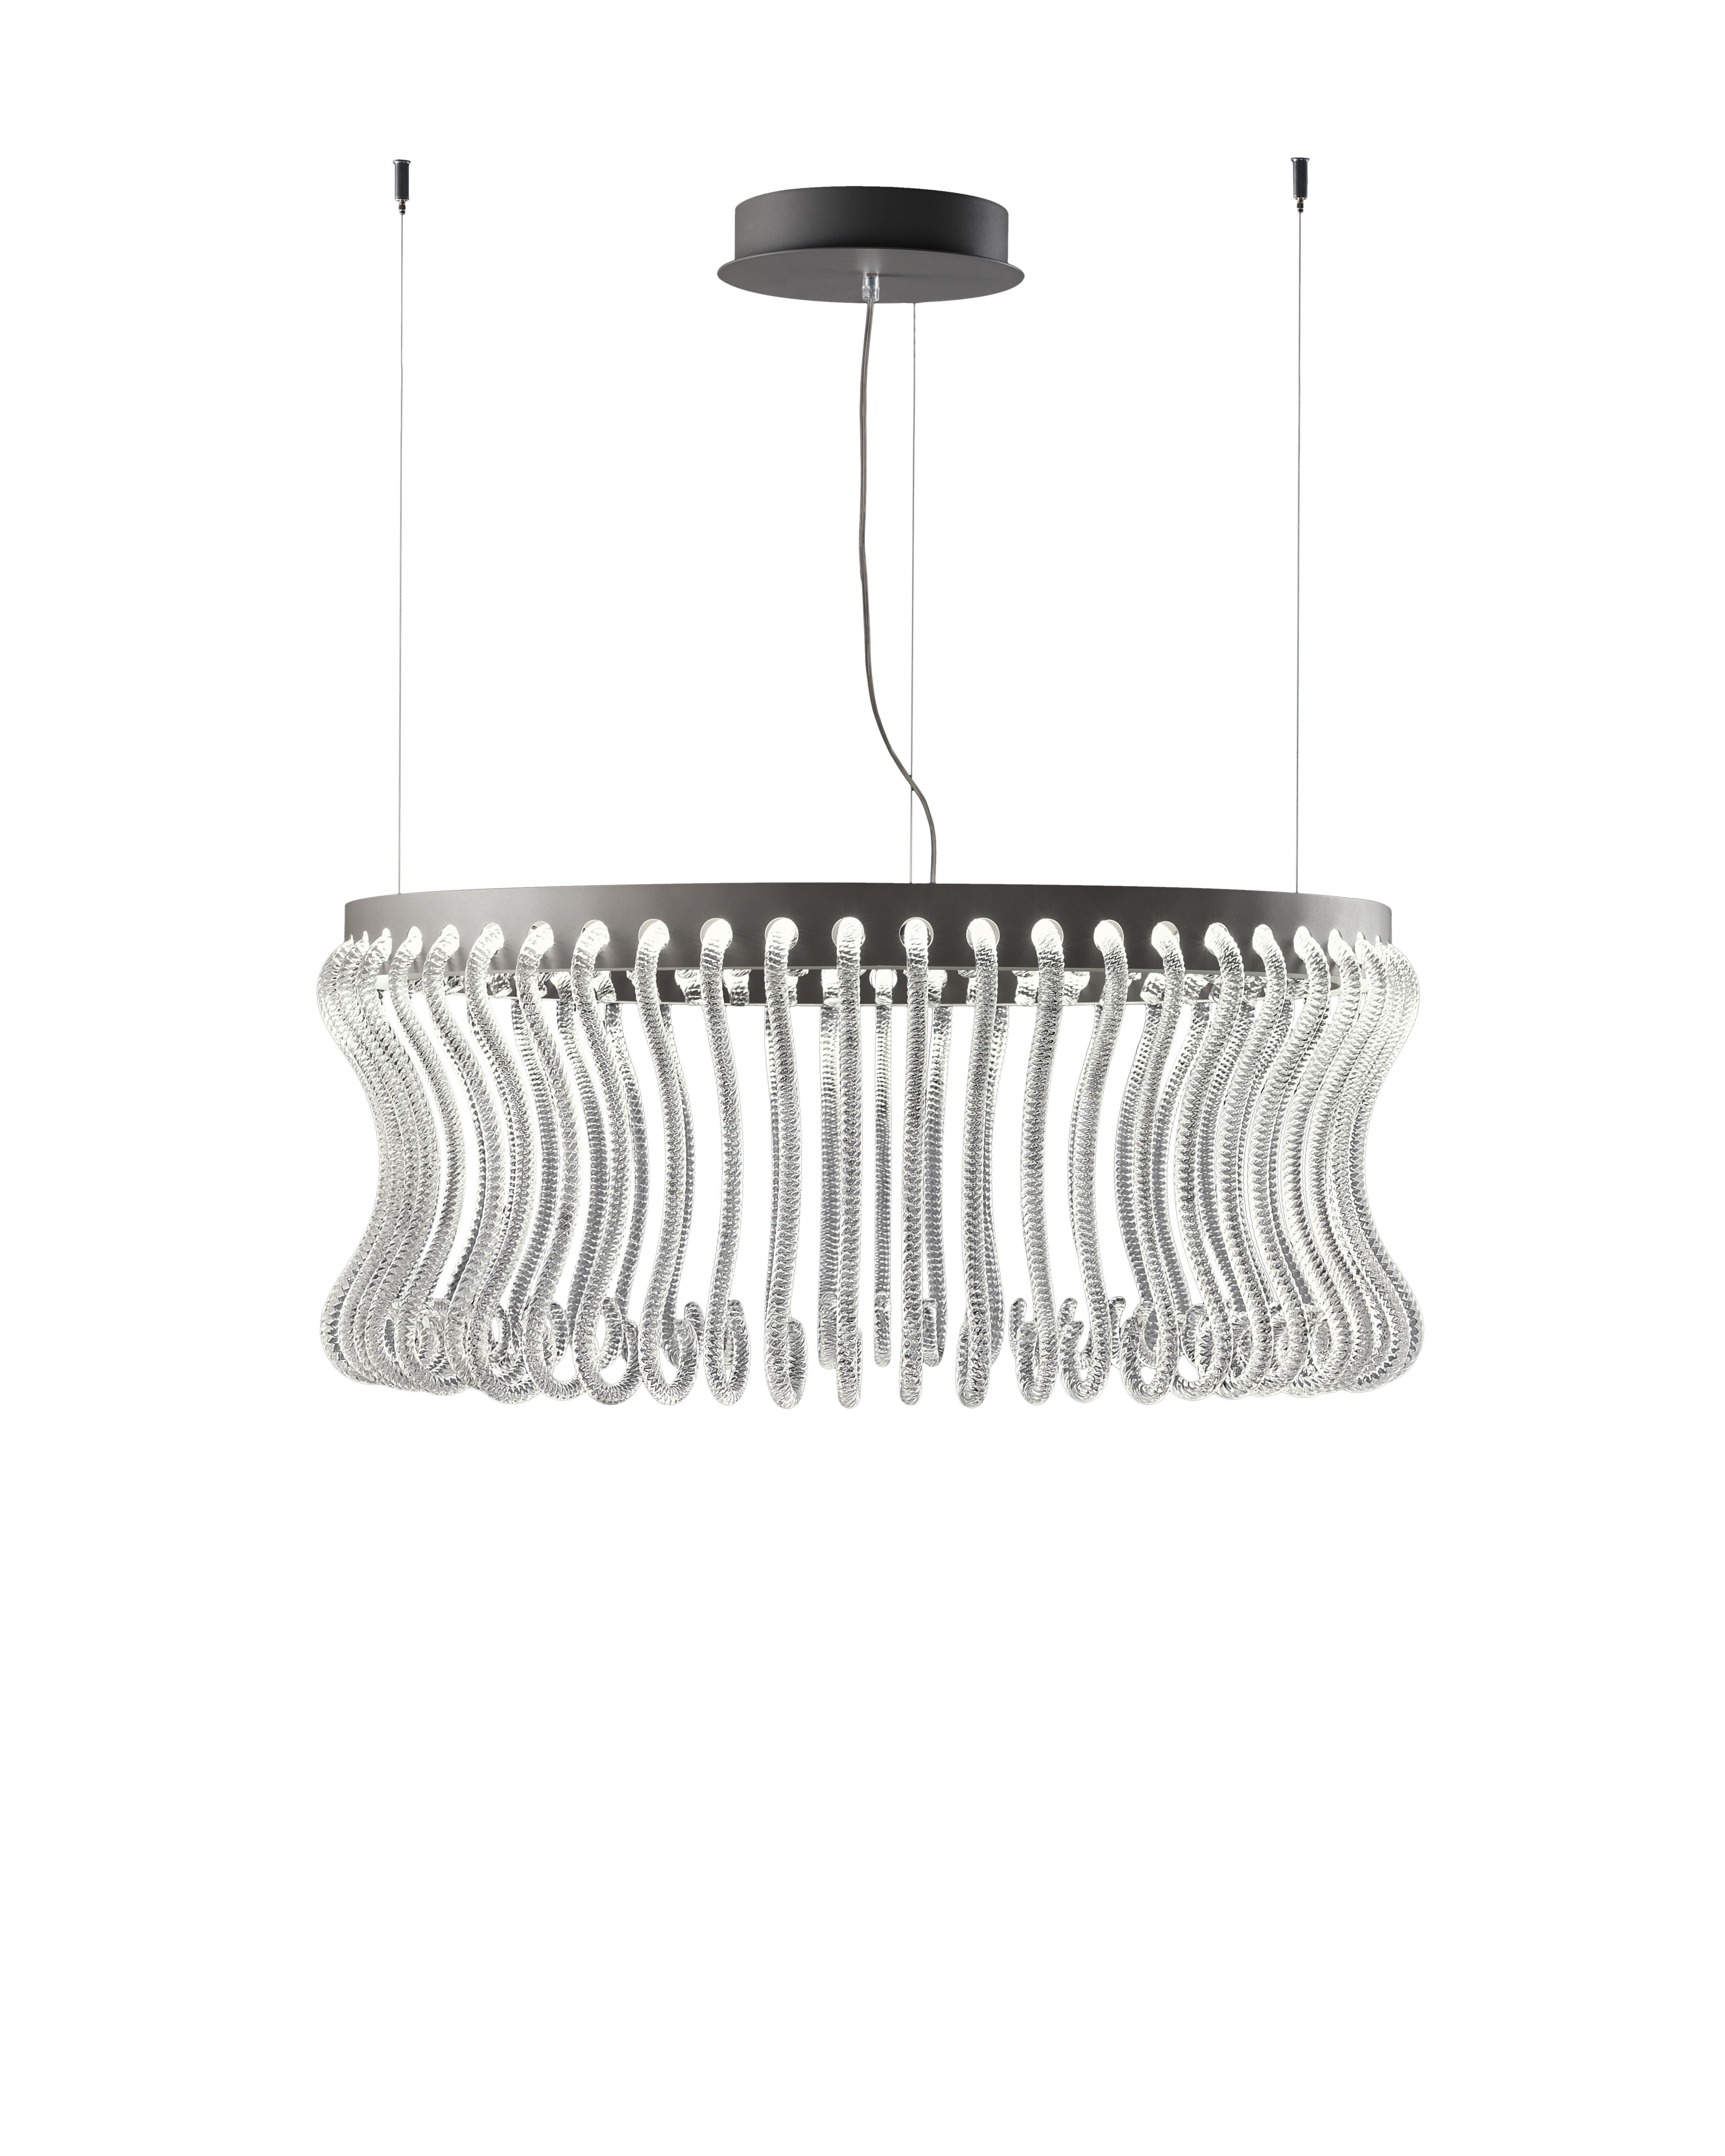 Crown 7337 Suspension Lamp in Glass, by Brian Rasmussen from 